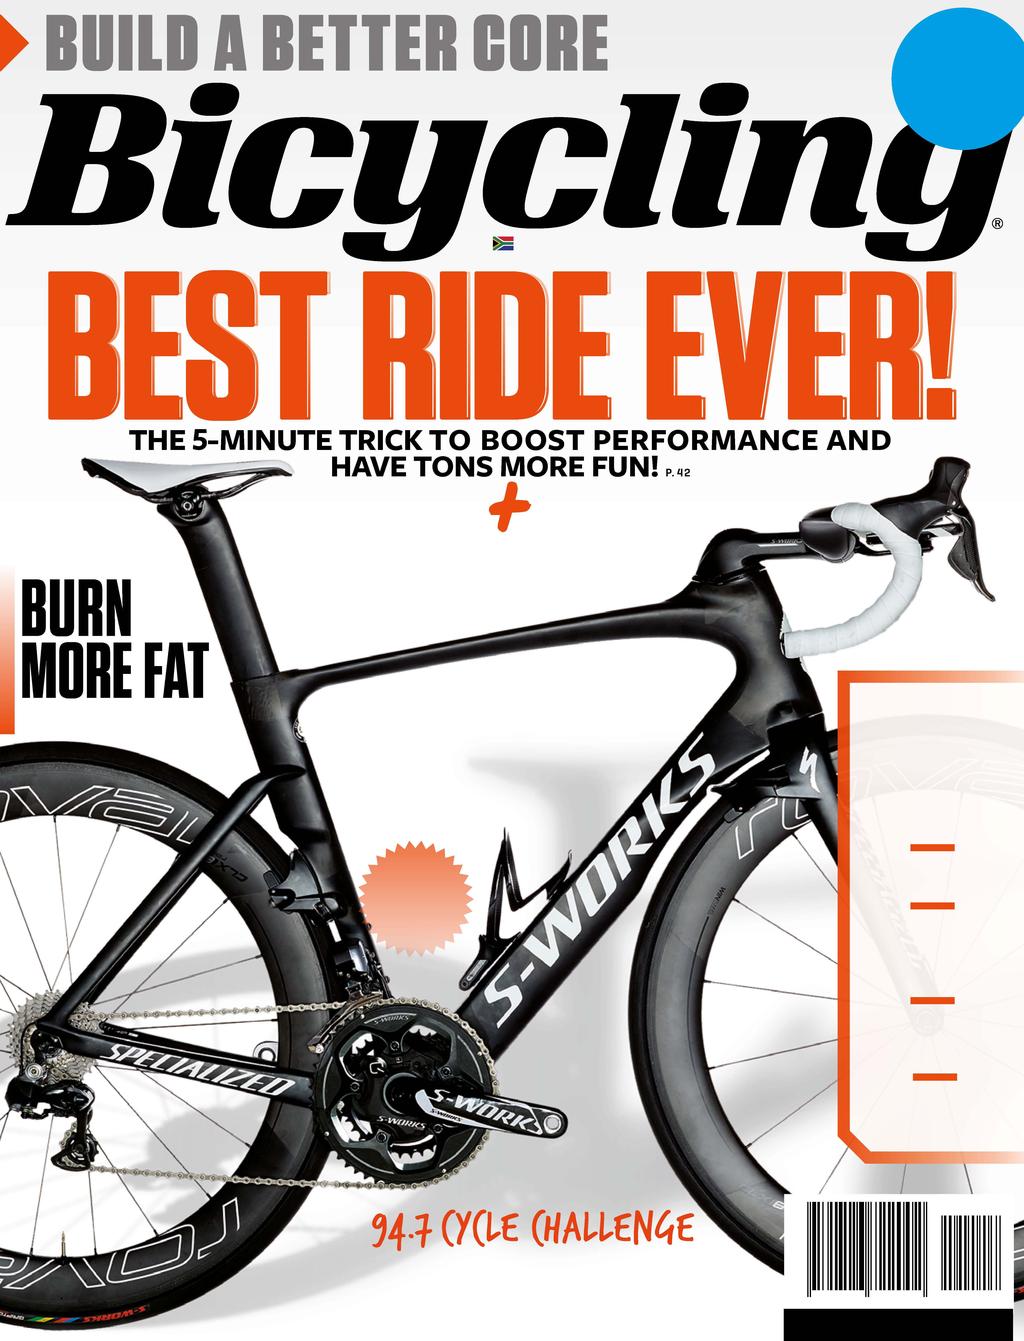 THE ONCE-A-WEEK 20 WORKOUT E P I C R O1 6U R E V E A L E DT E E XCL U SI V E P. 44 NOVEMBER 2015 SA S BEST-SELLING CYCLING MAGAZINE REVOLUTIONISE YOUR COFFEE STOP P. 36 THE PERFECT PLAN BONUS TIPS P.